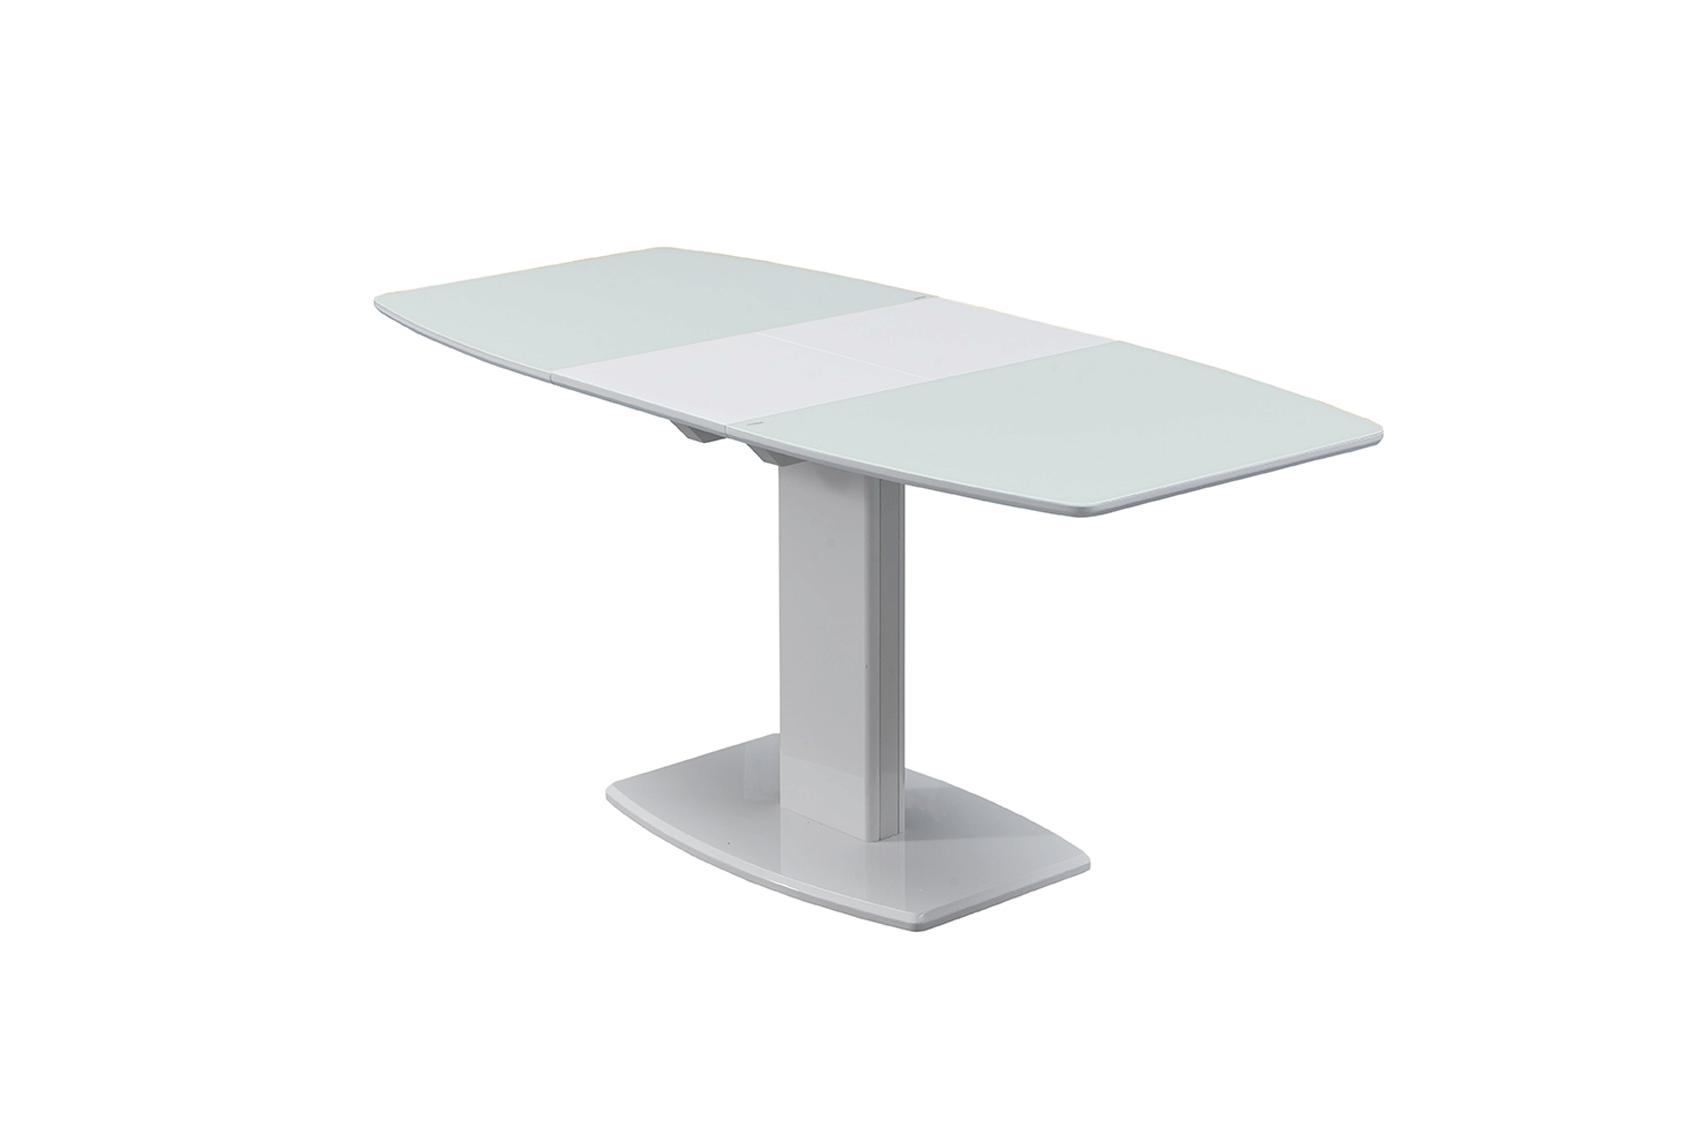 Contemporary, Modern Dining Table 2396 2396DININGTABLE in White 